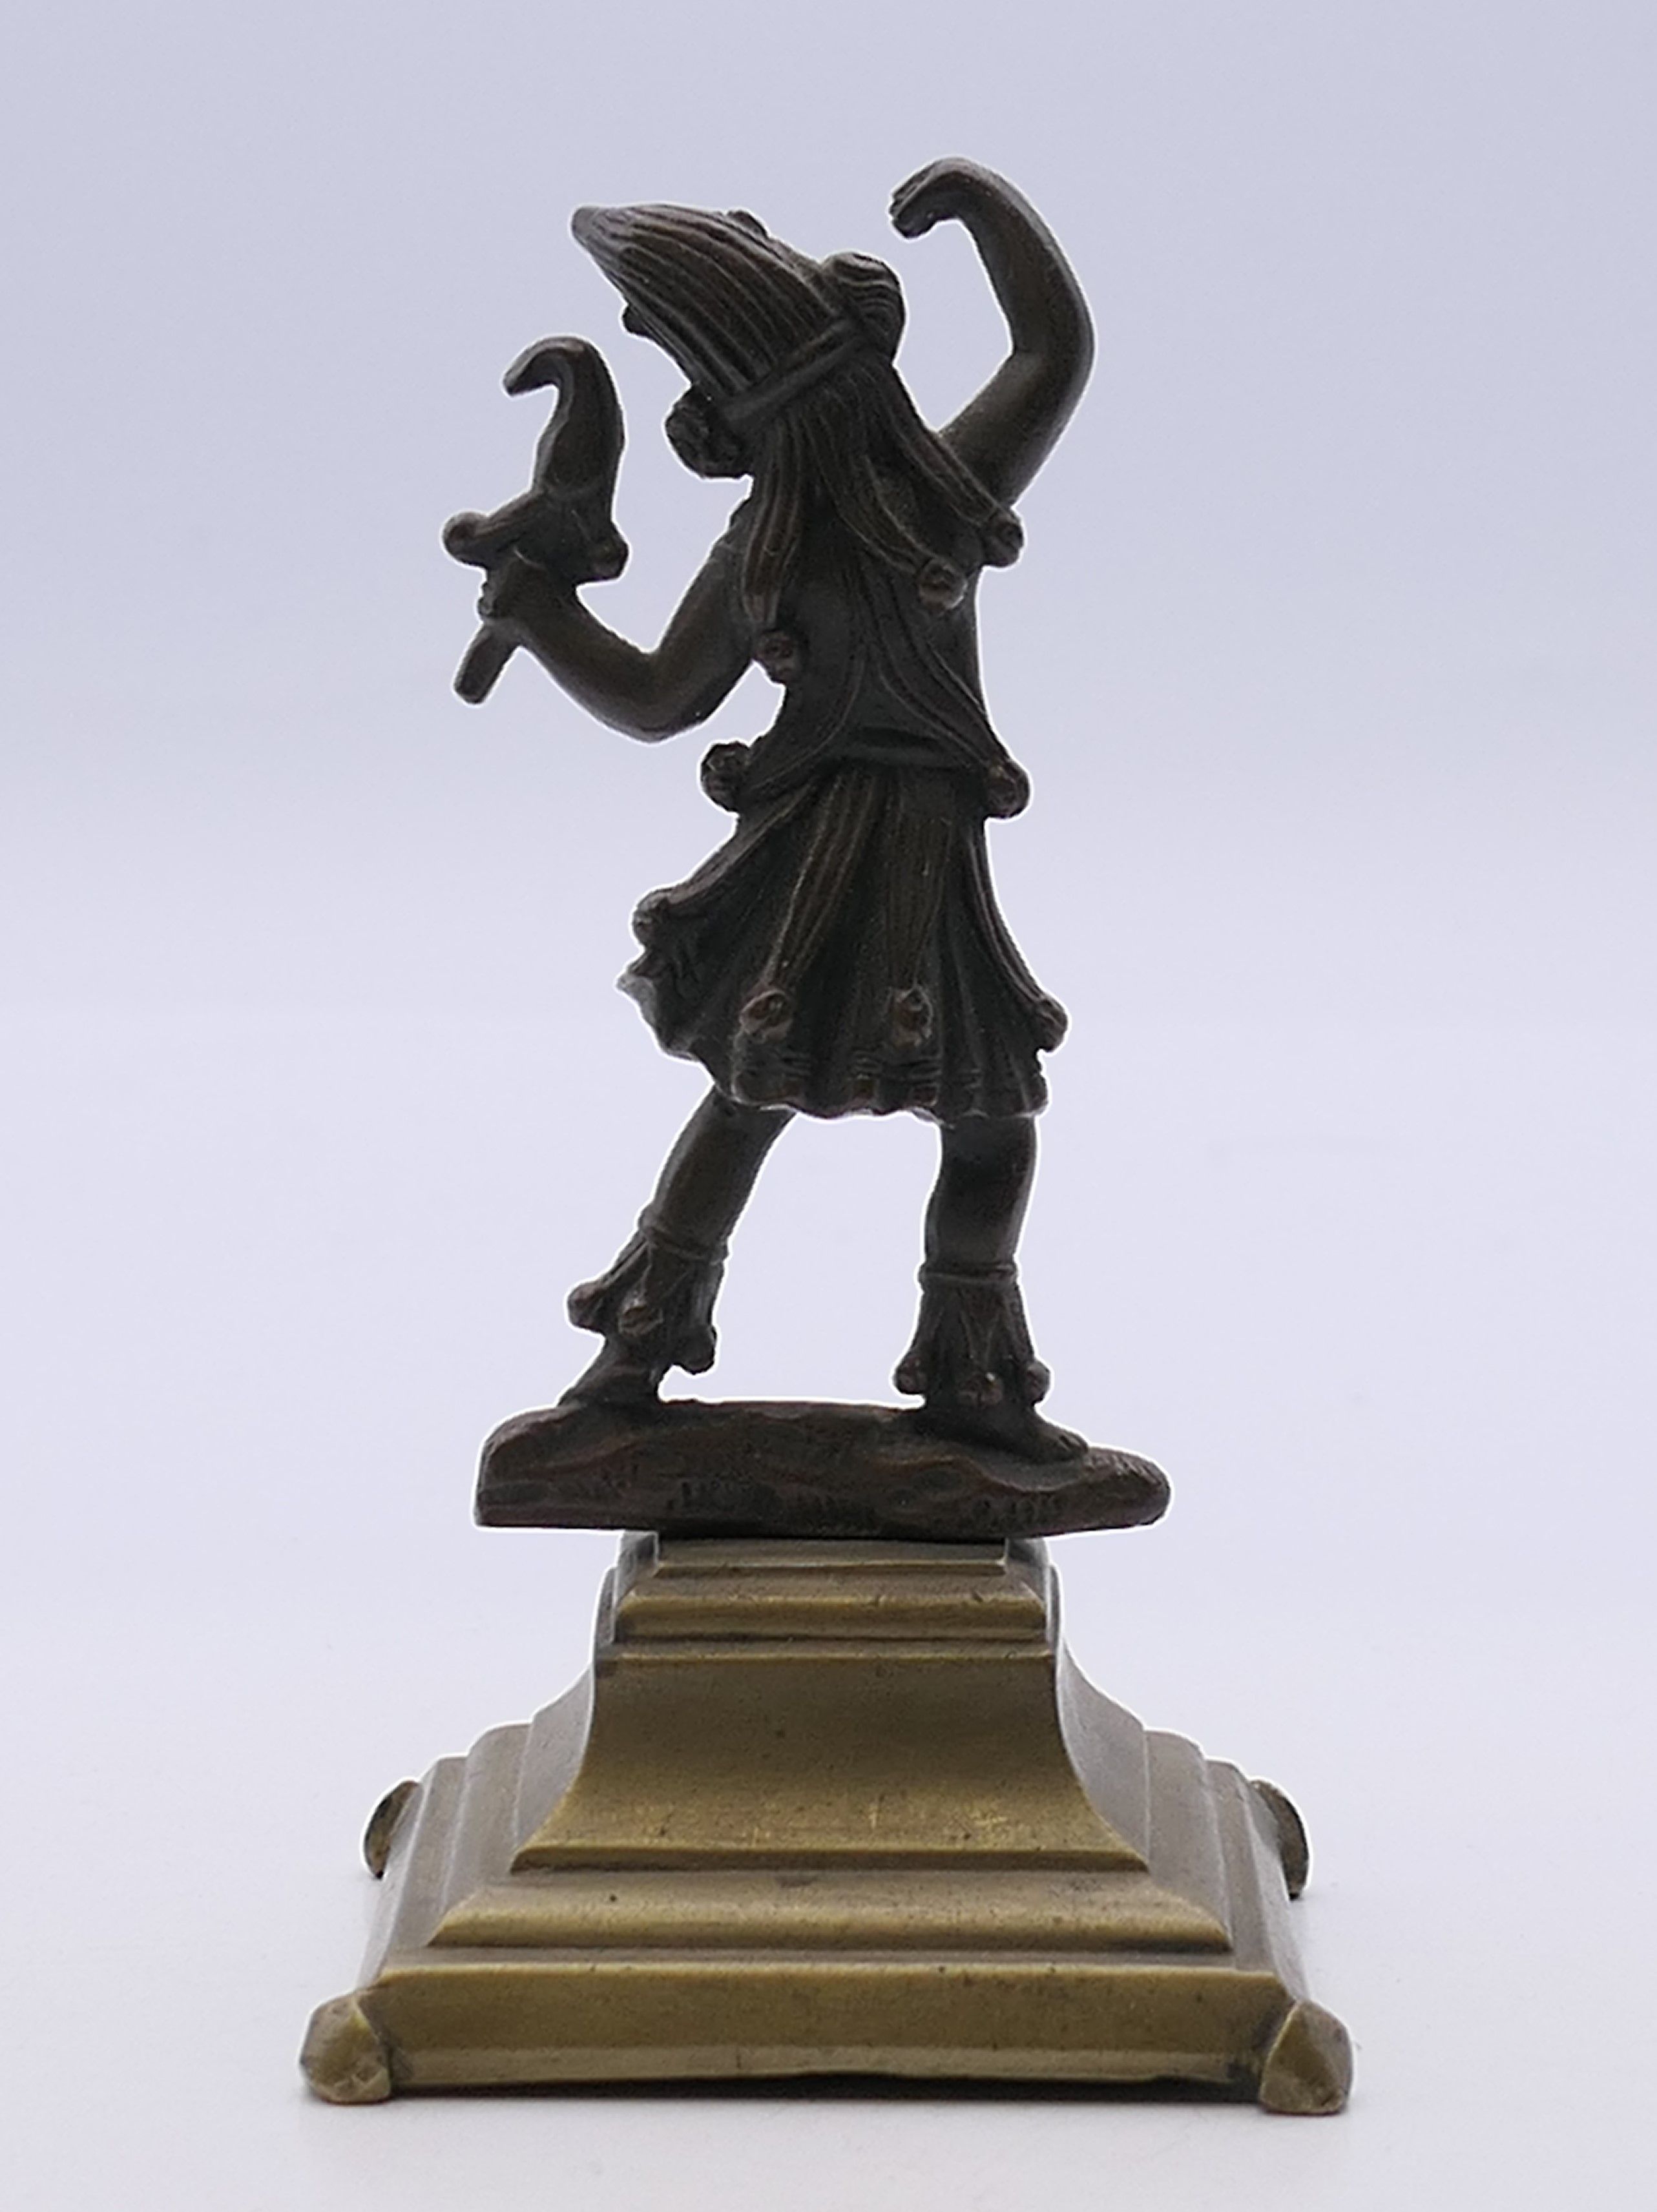 A 19th century bronze model of a jester mounted on a brass base. 10 cm high. - Image 3 of 3